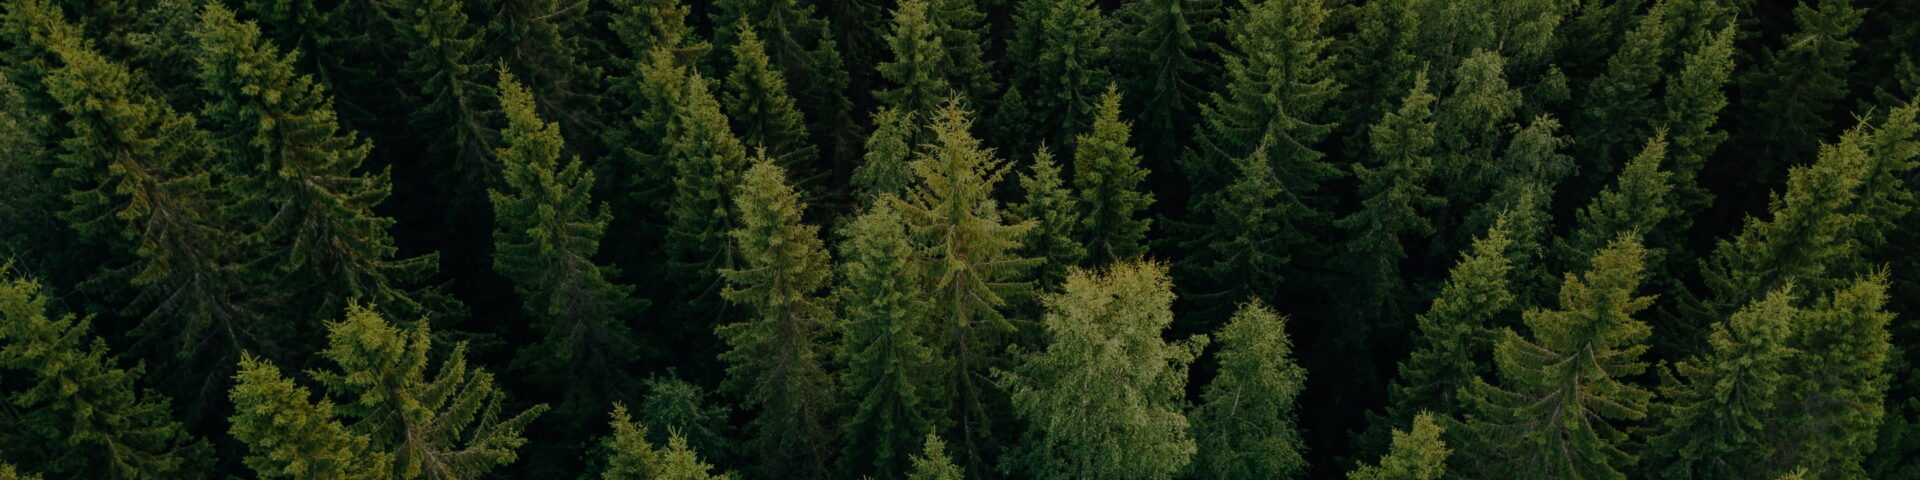 Environment picture of green tree tops